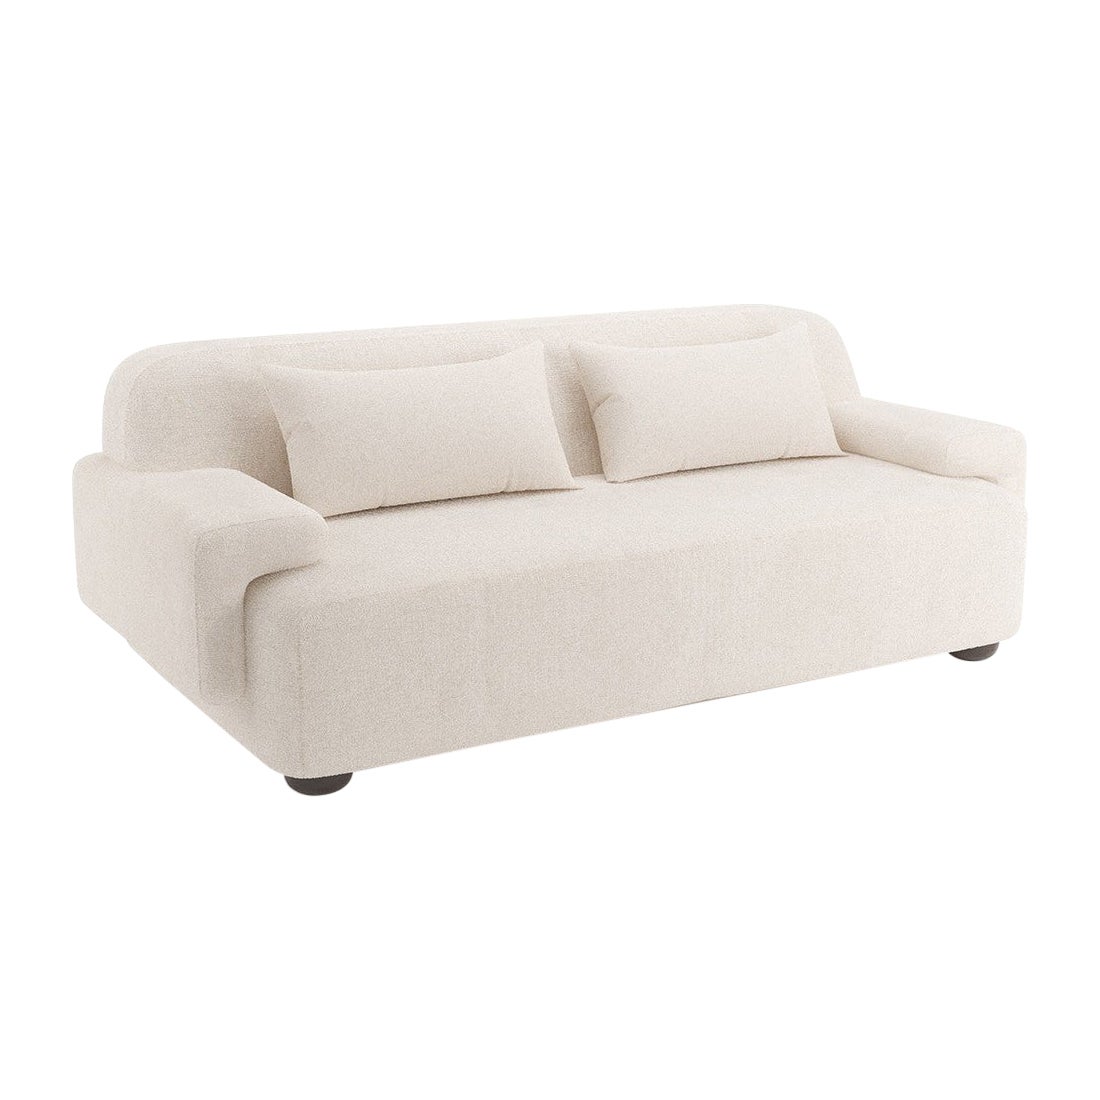 Popus Editions Lena 3 Seater Sofa in Macadamia London Linen Fabric For Sale